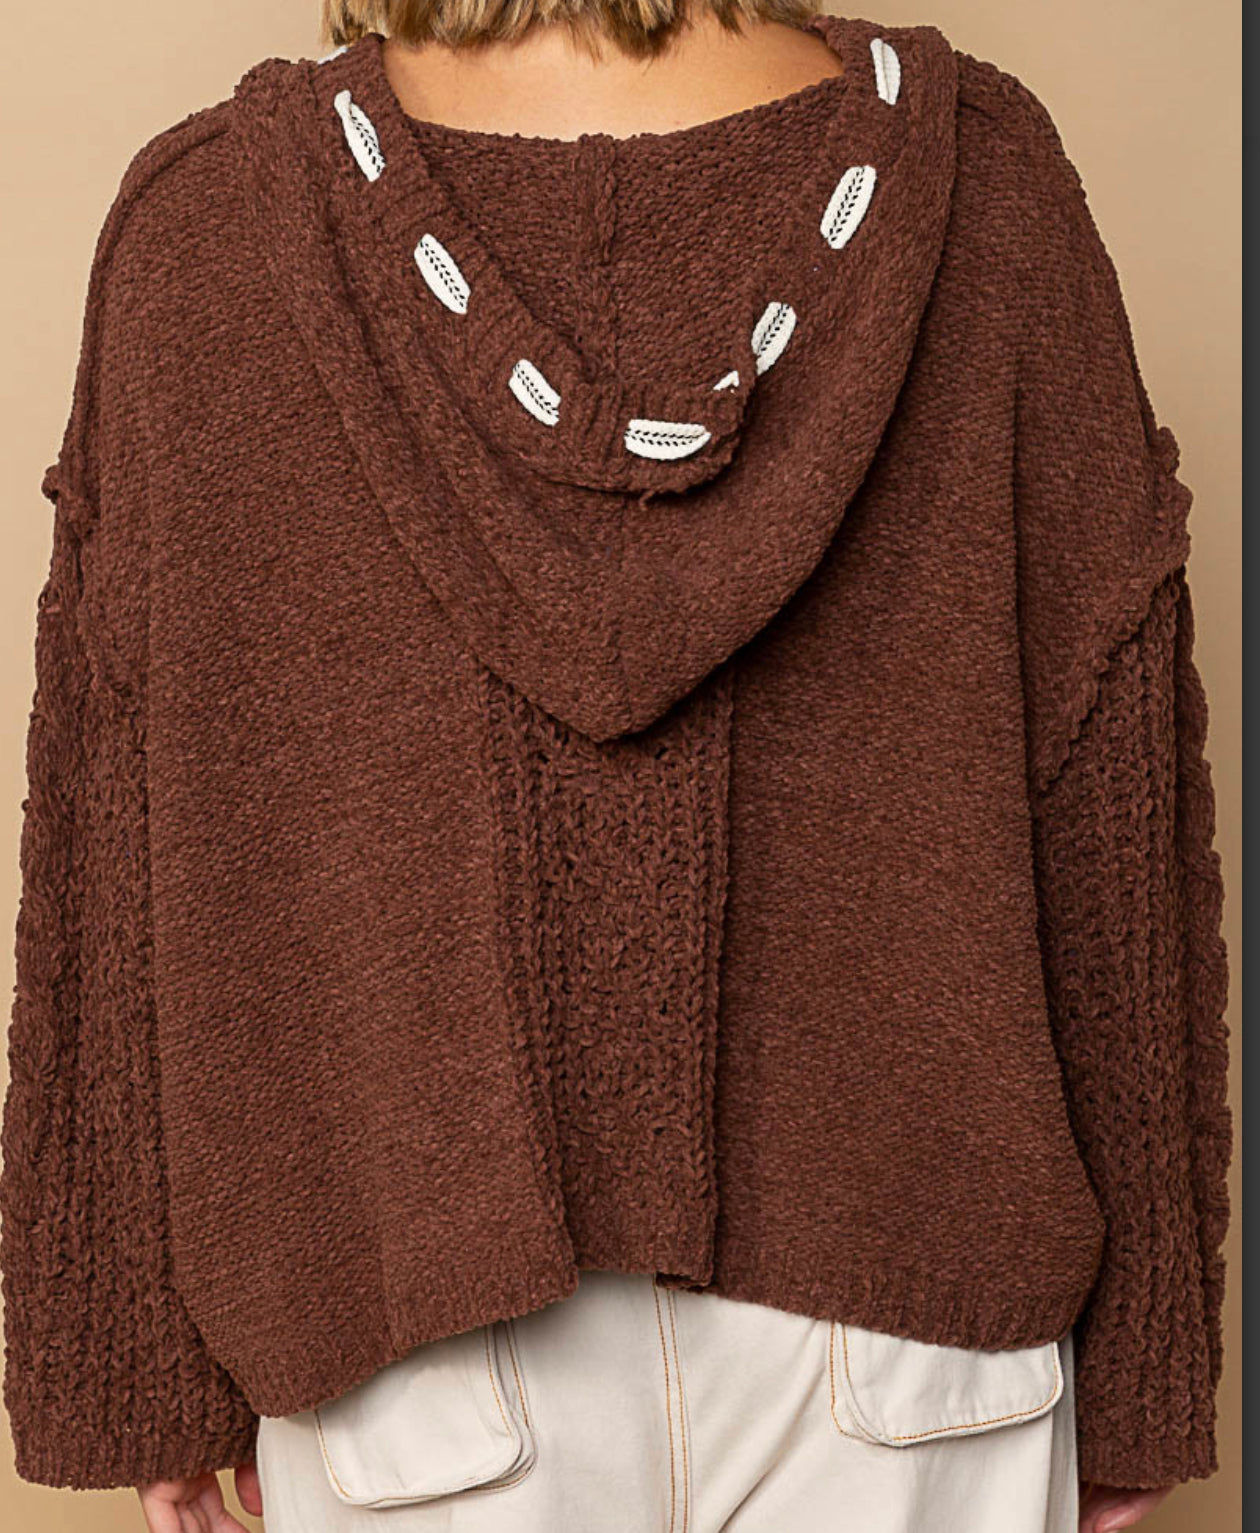 Chenille V-Neck Sweater with Long Sleeves (Deep Chocolate)